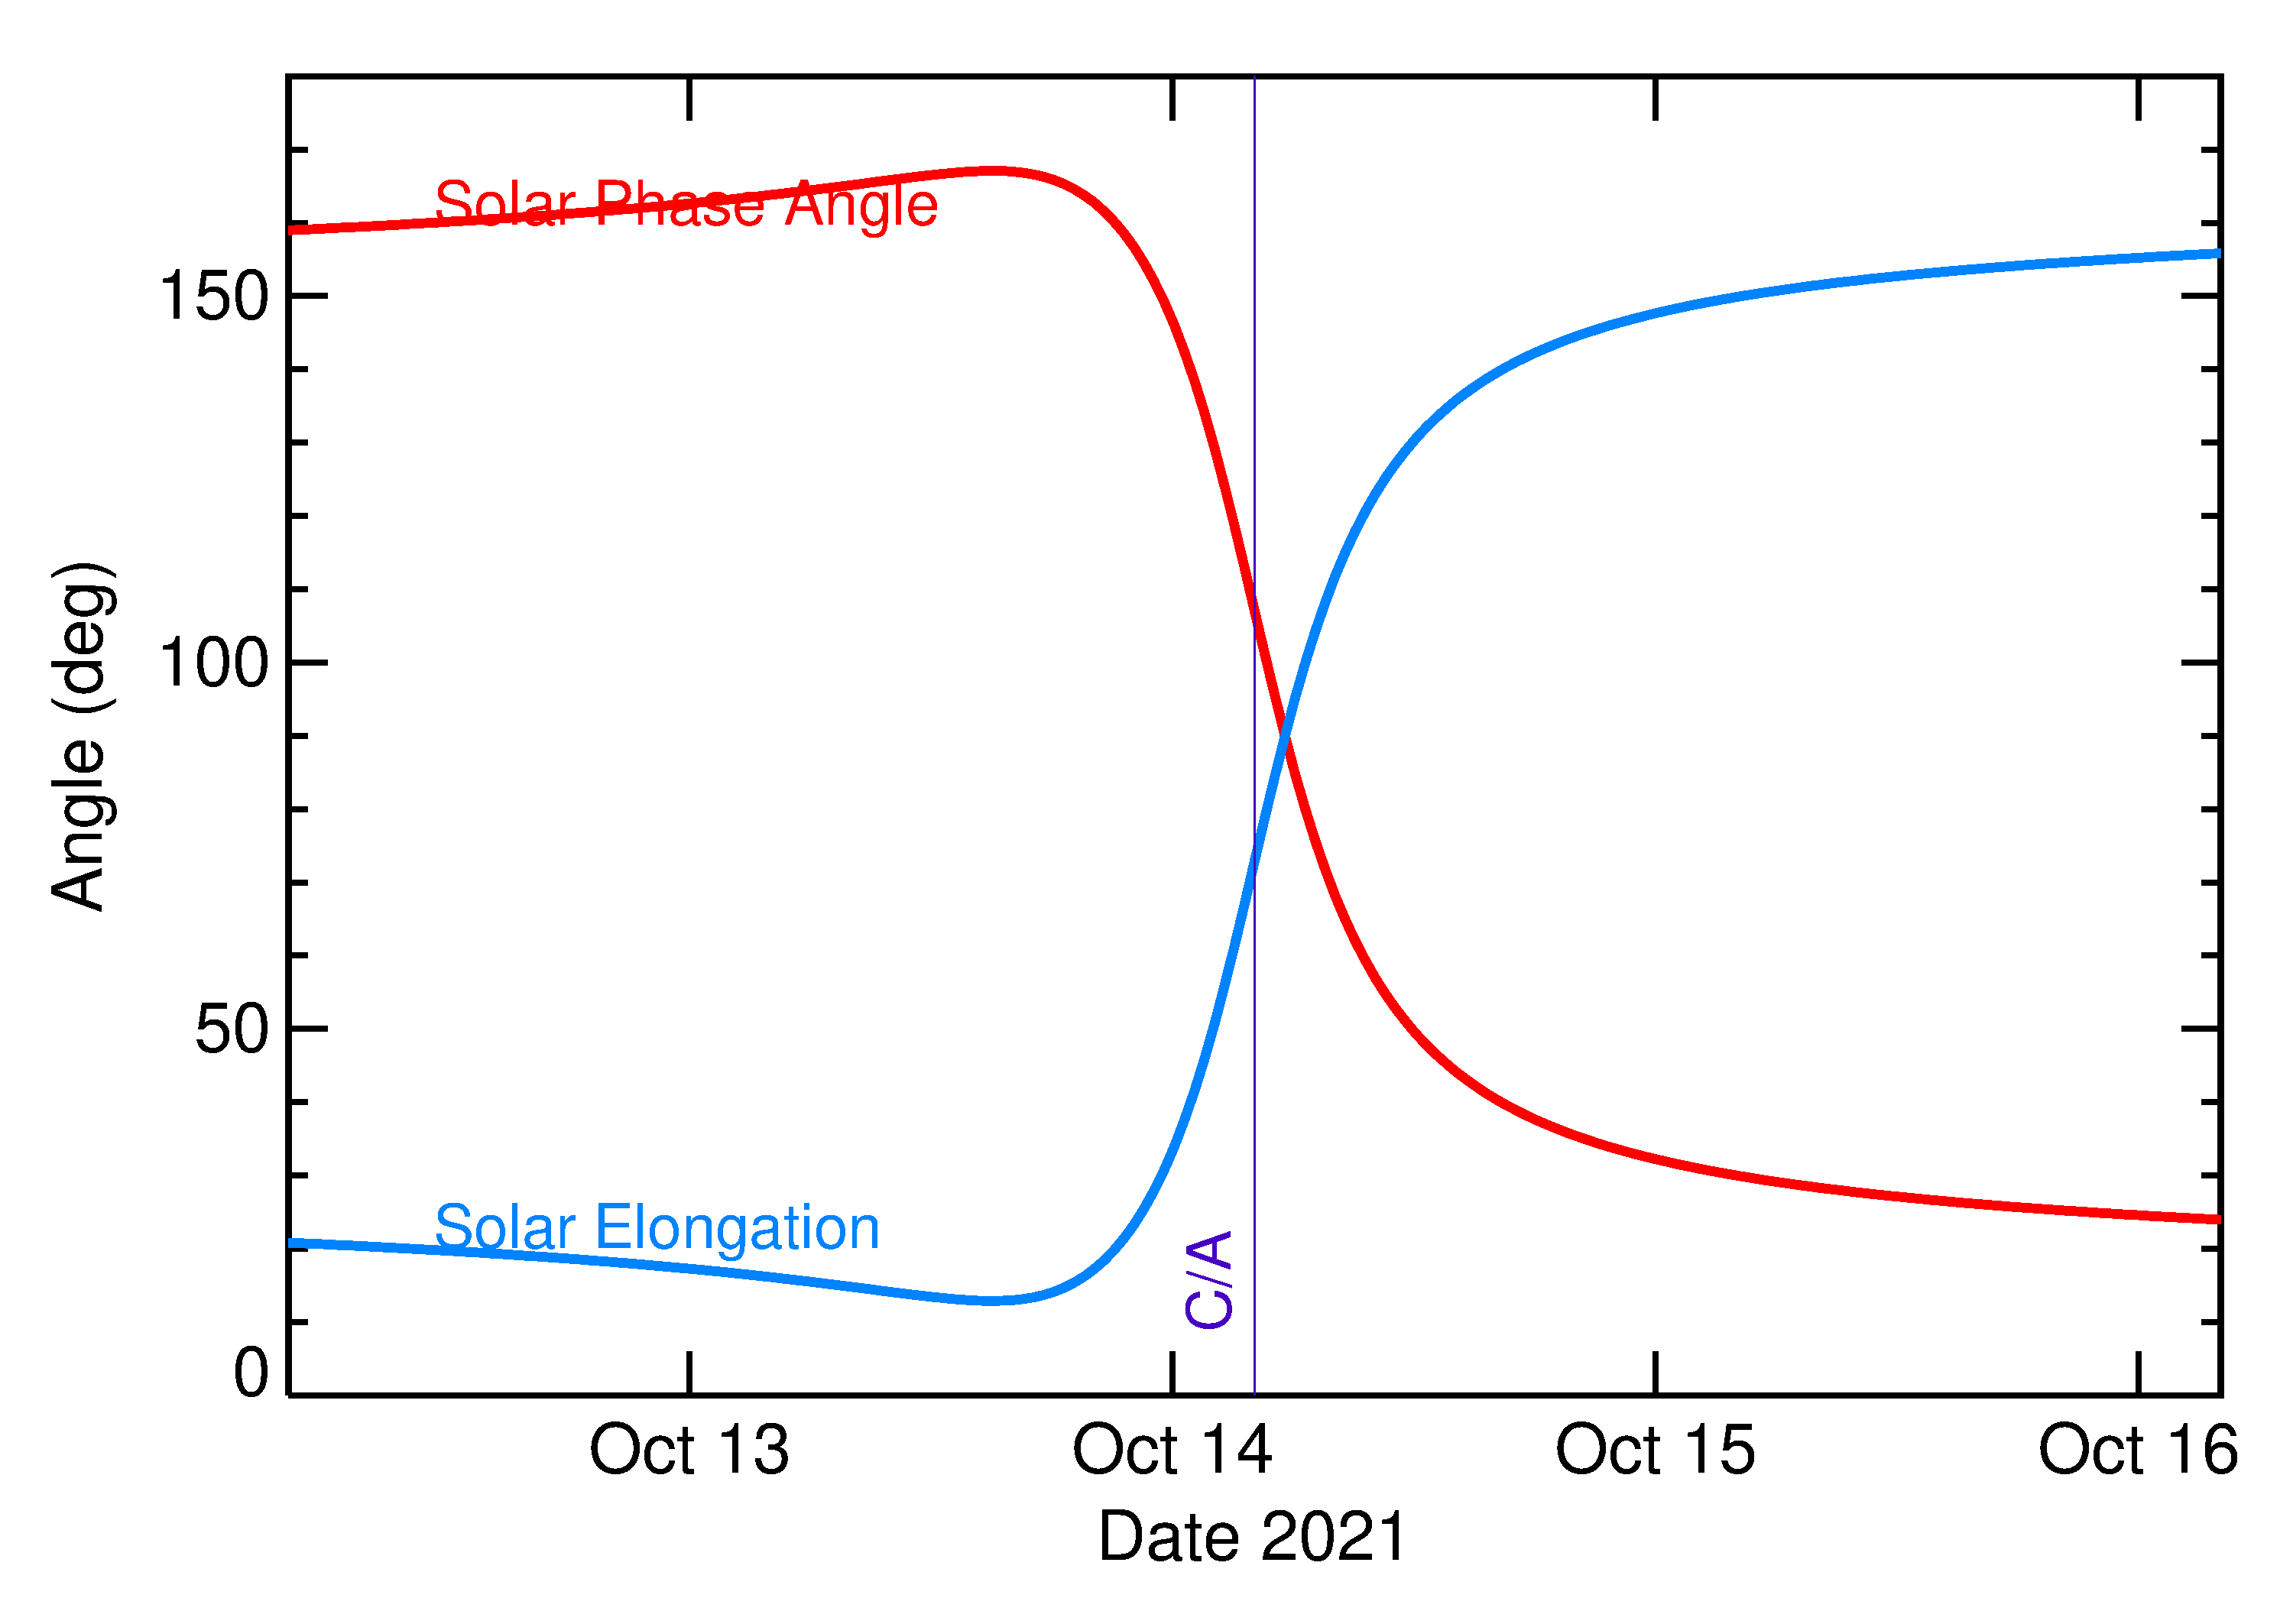 Solar Elongation and Solar Phase Angle of 2021 TM14 in the days around closest approach